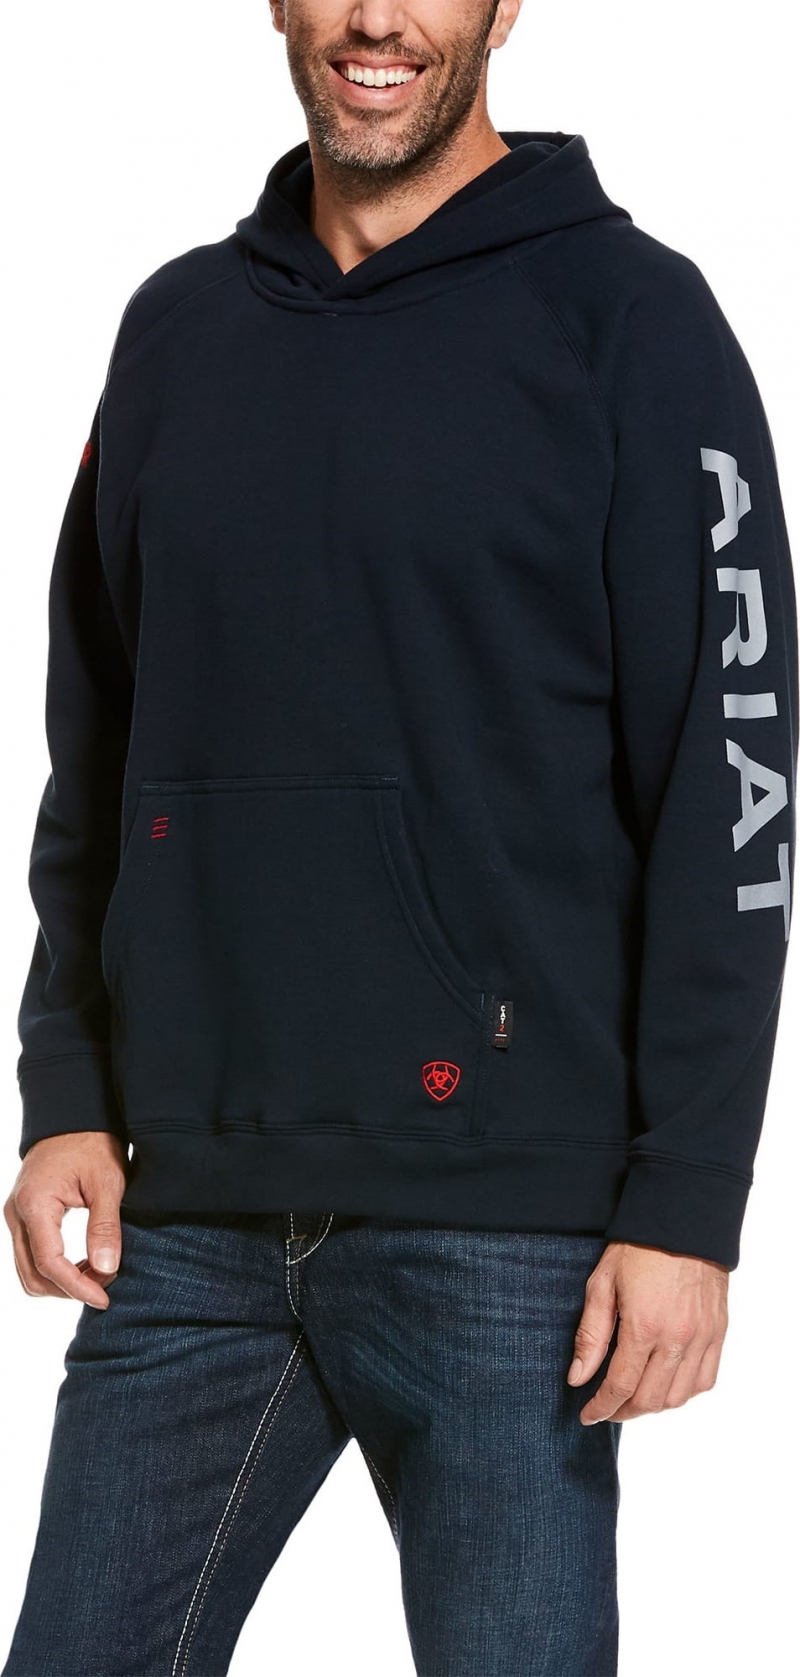 *SALE* ONLY SMALL AND MEDIUM LEFT!! Ariat FR Primo Logo  Hoodie - Navy